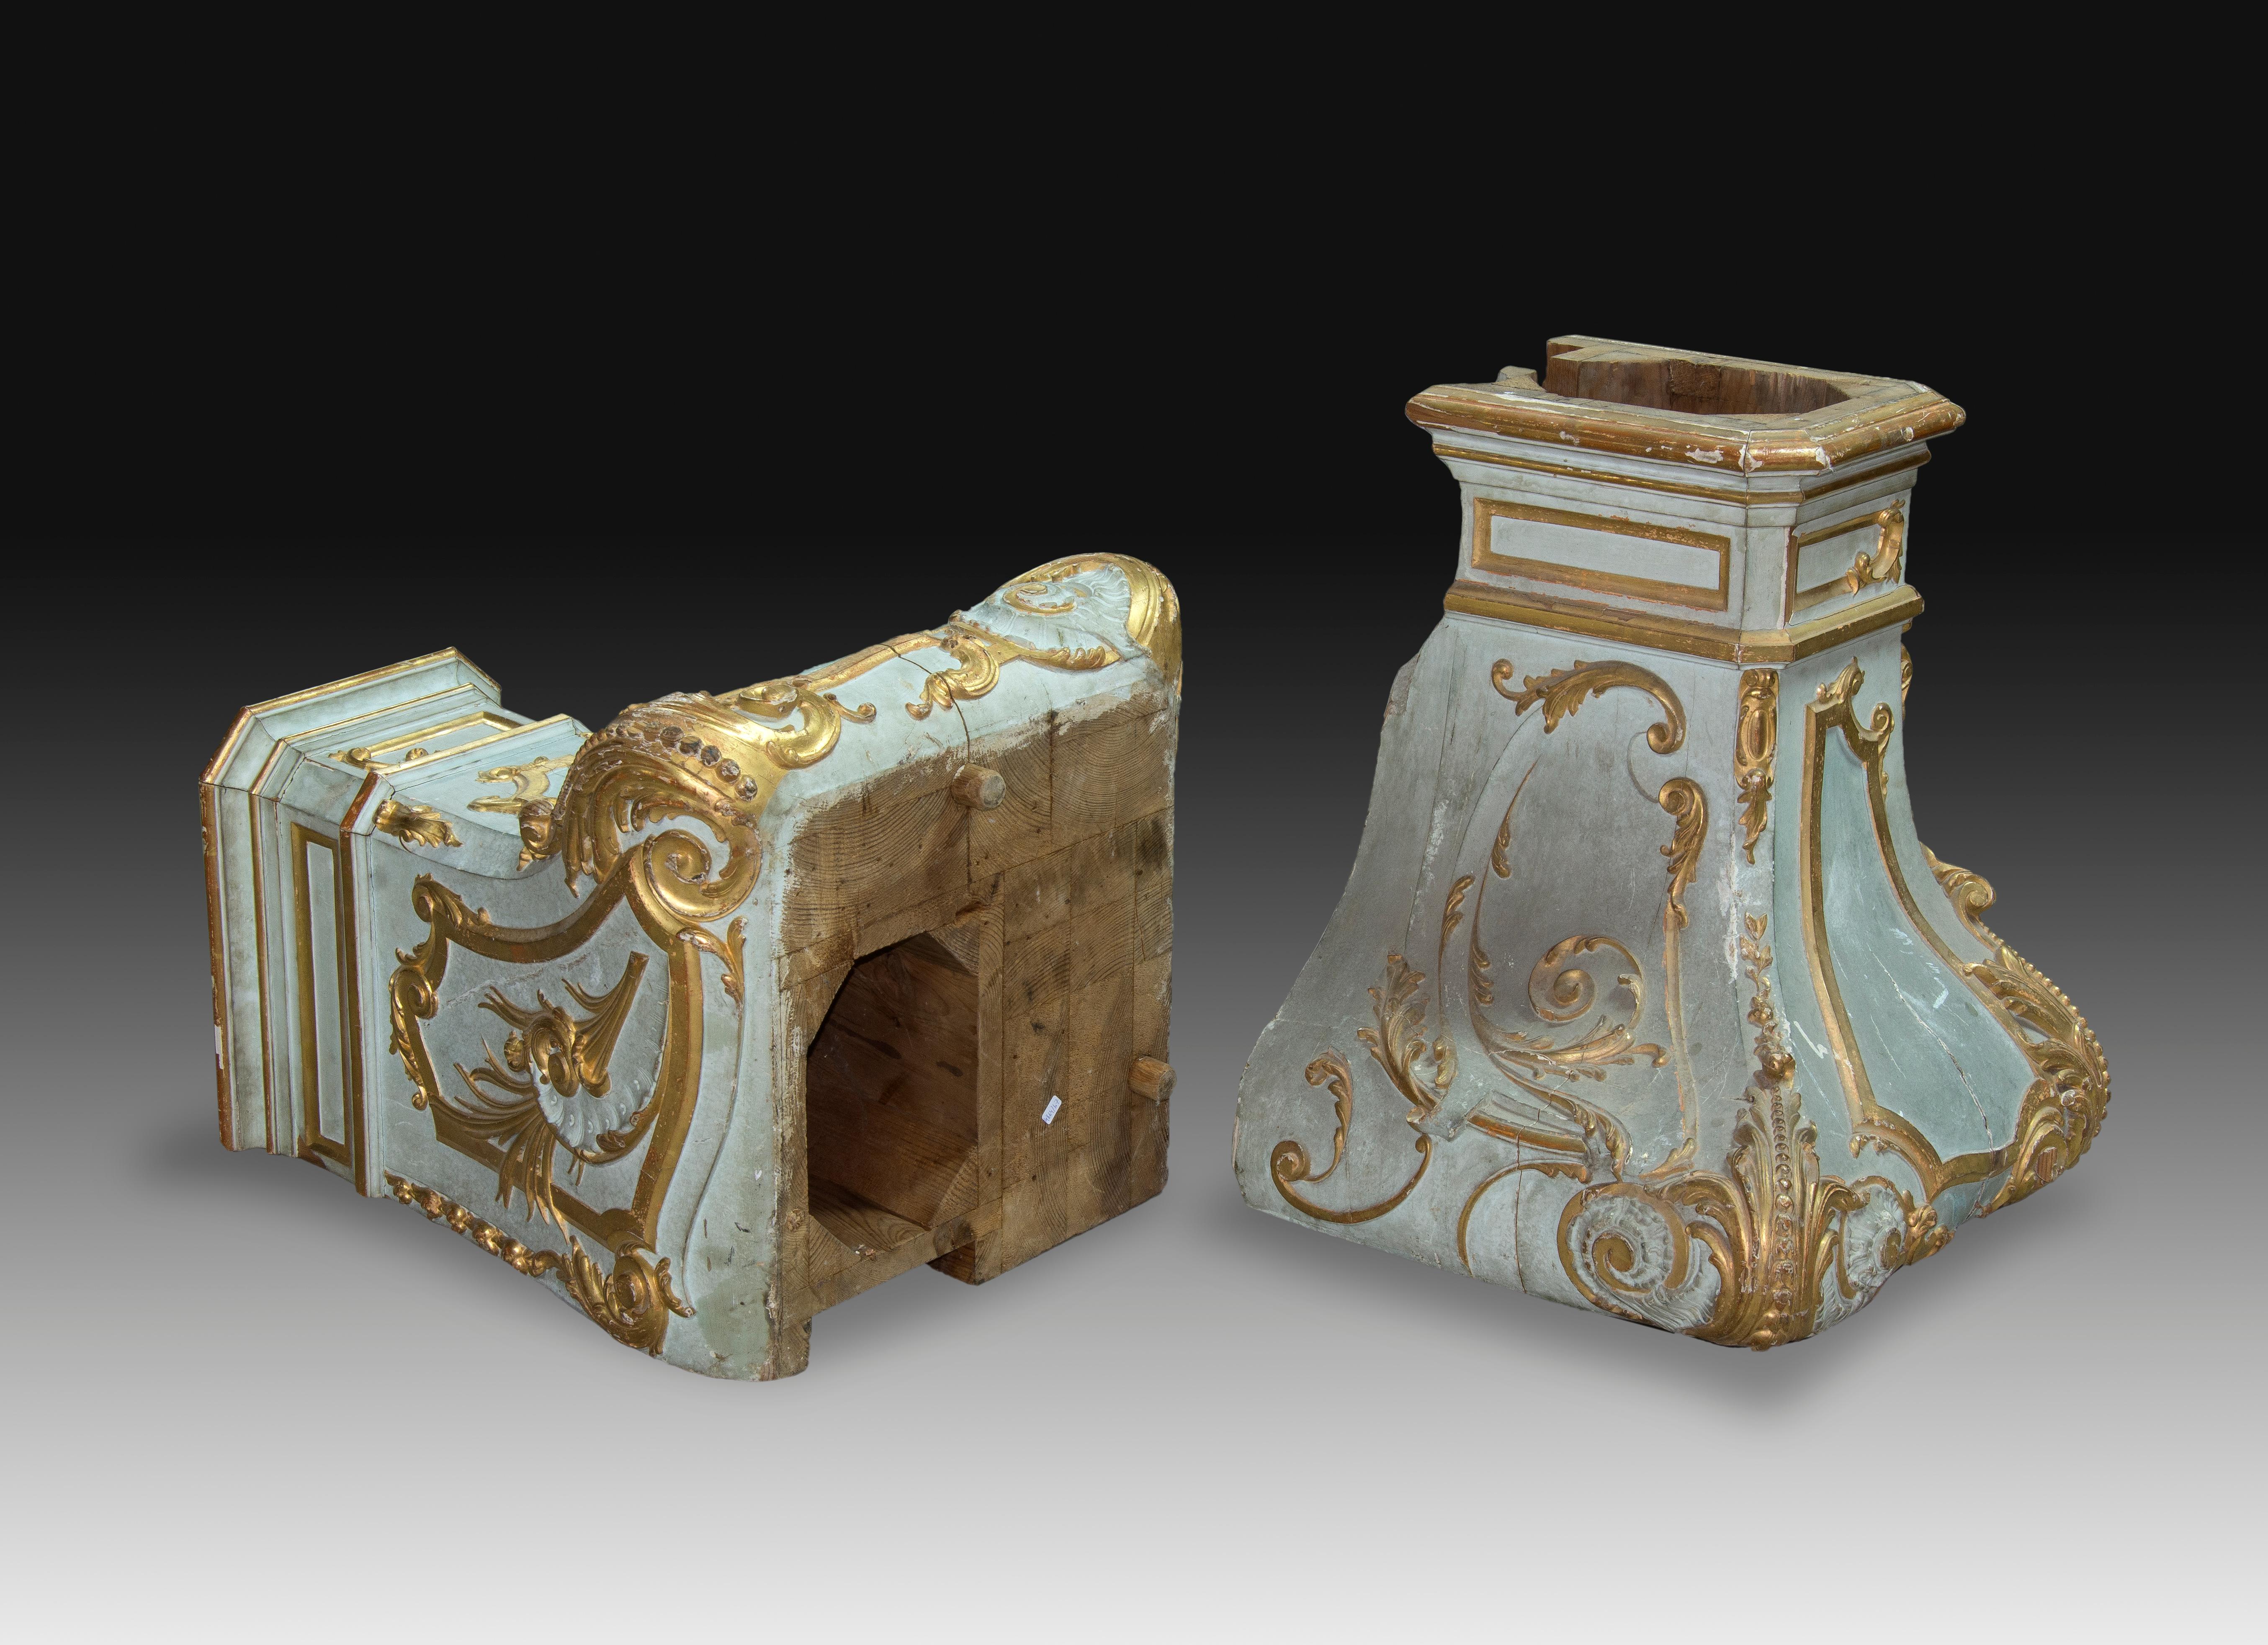 Rococo Revival Pair of Corbels, Polychromed and Gilded Pine Wood, France, 19th Century